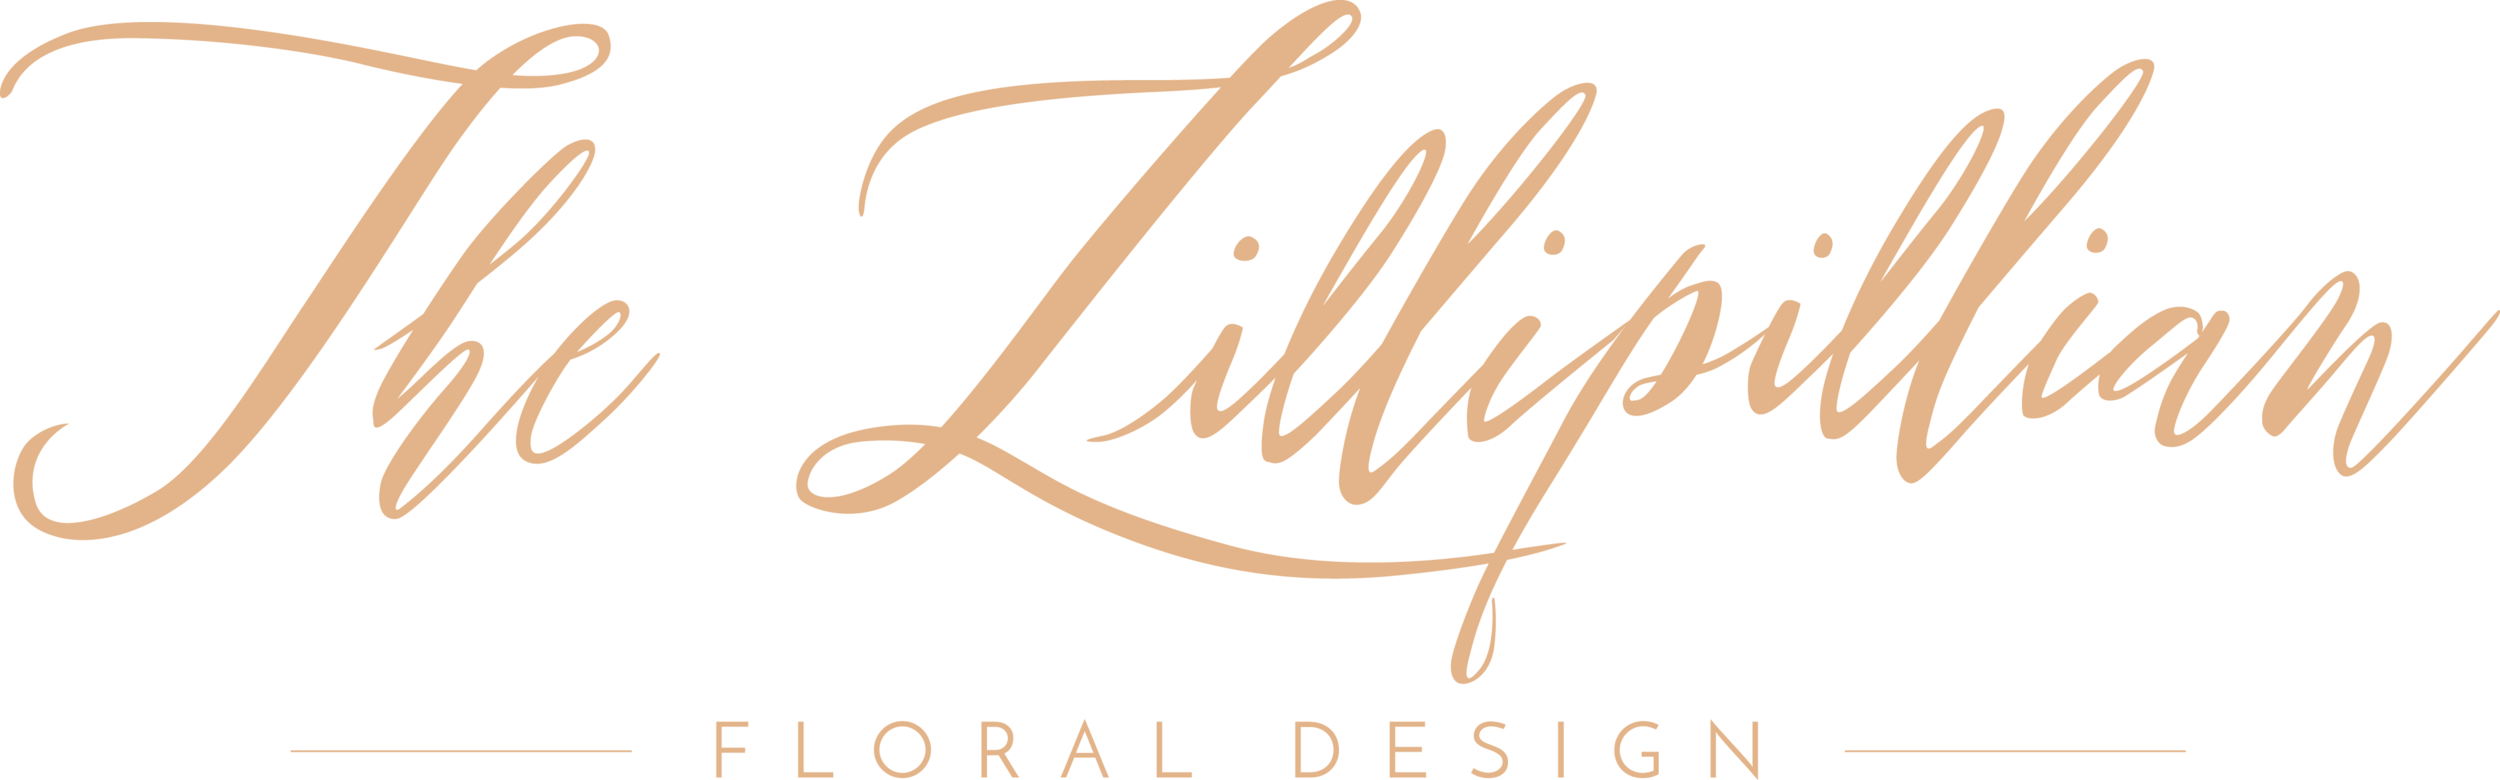 Floral Designs and Styling by The Lillipillian